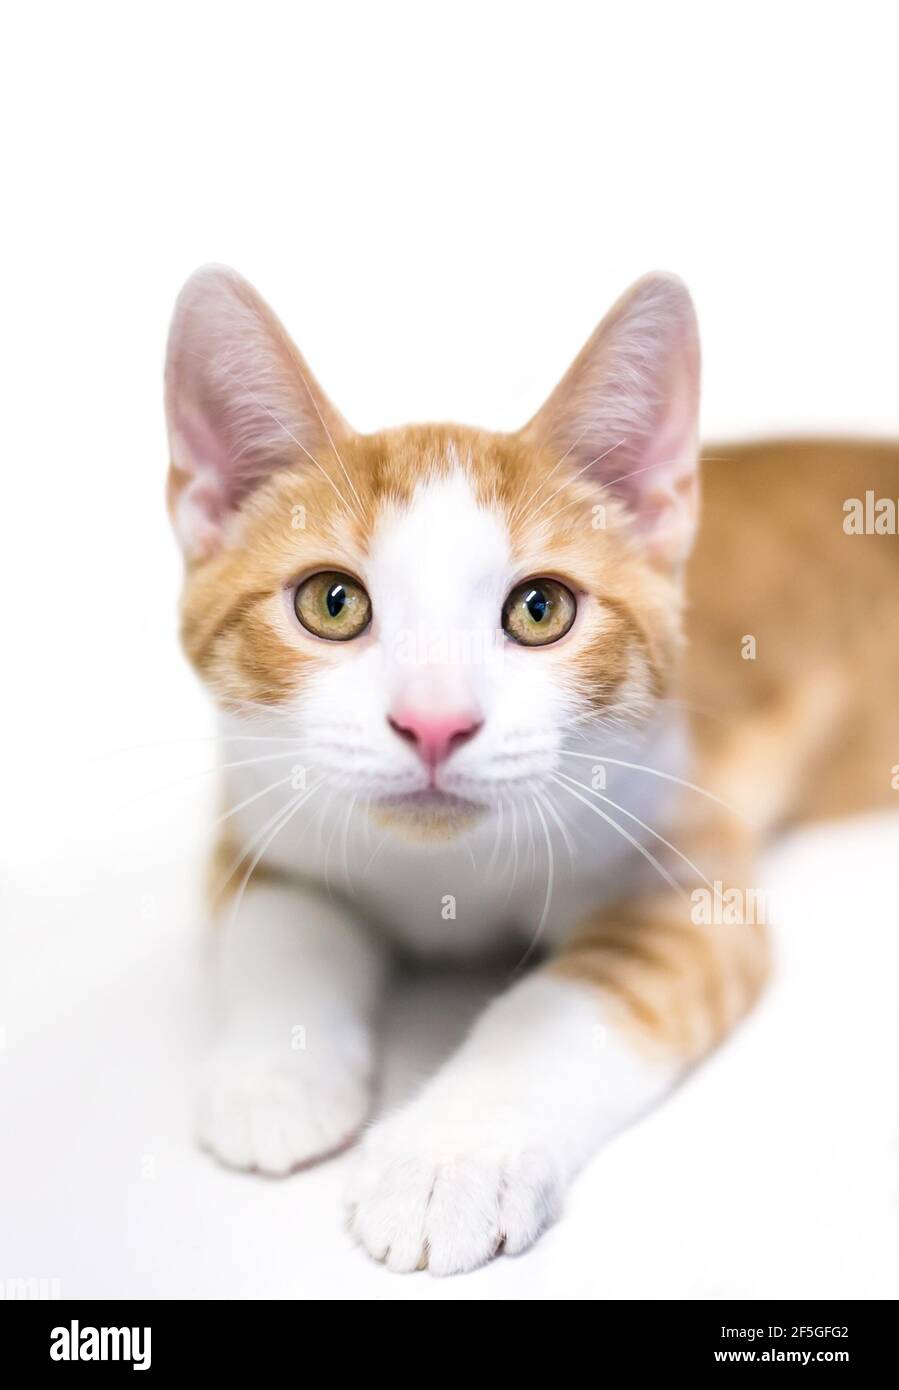 A cute shorthair kitten with orange tabby and white markings, lying down and looking at the camera Stock Photo